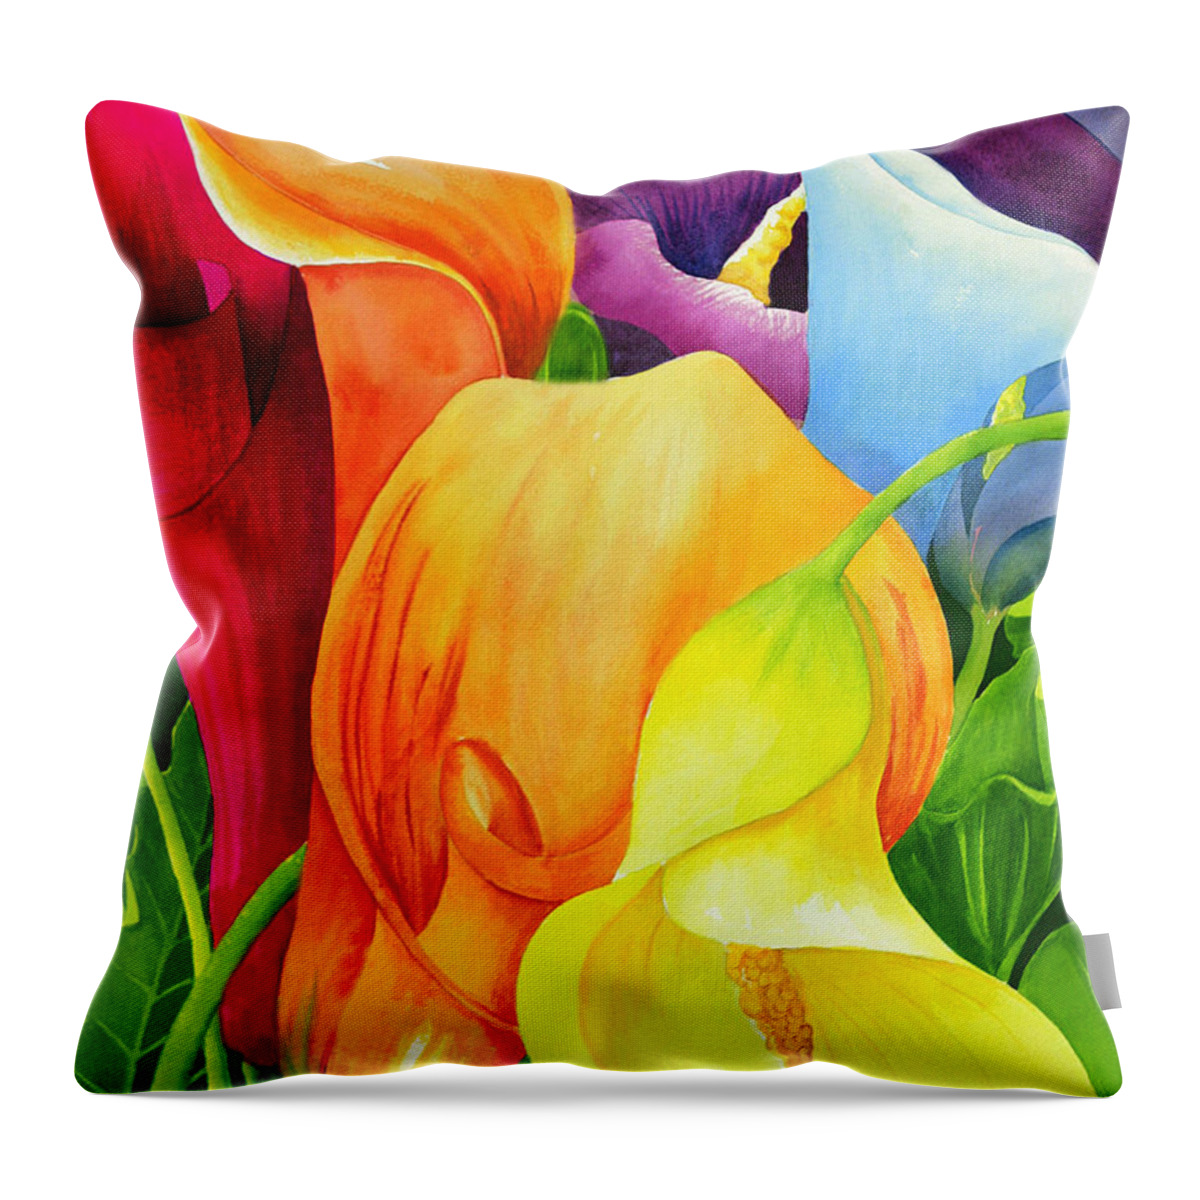 Flower Paintings Throw Pillow featuring the painting Calla Lily Rainbow by Janis Grau